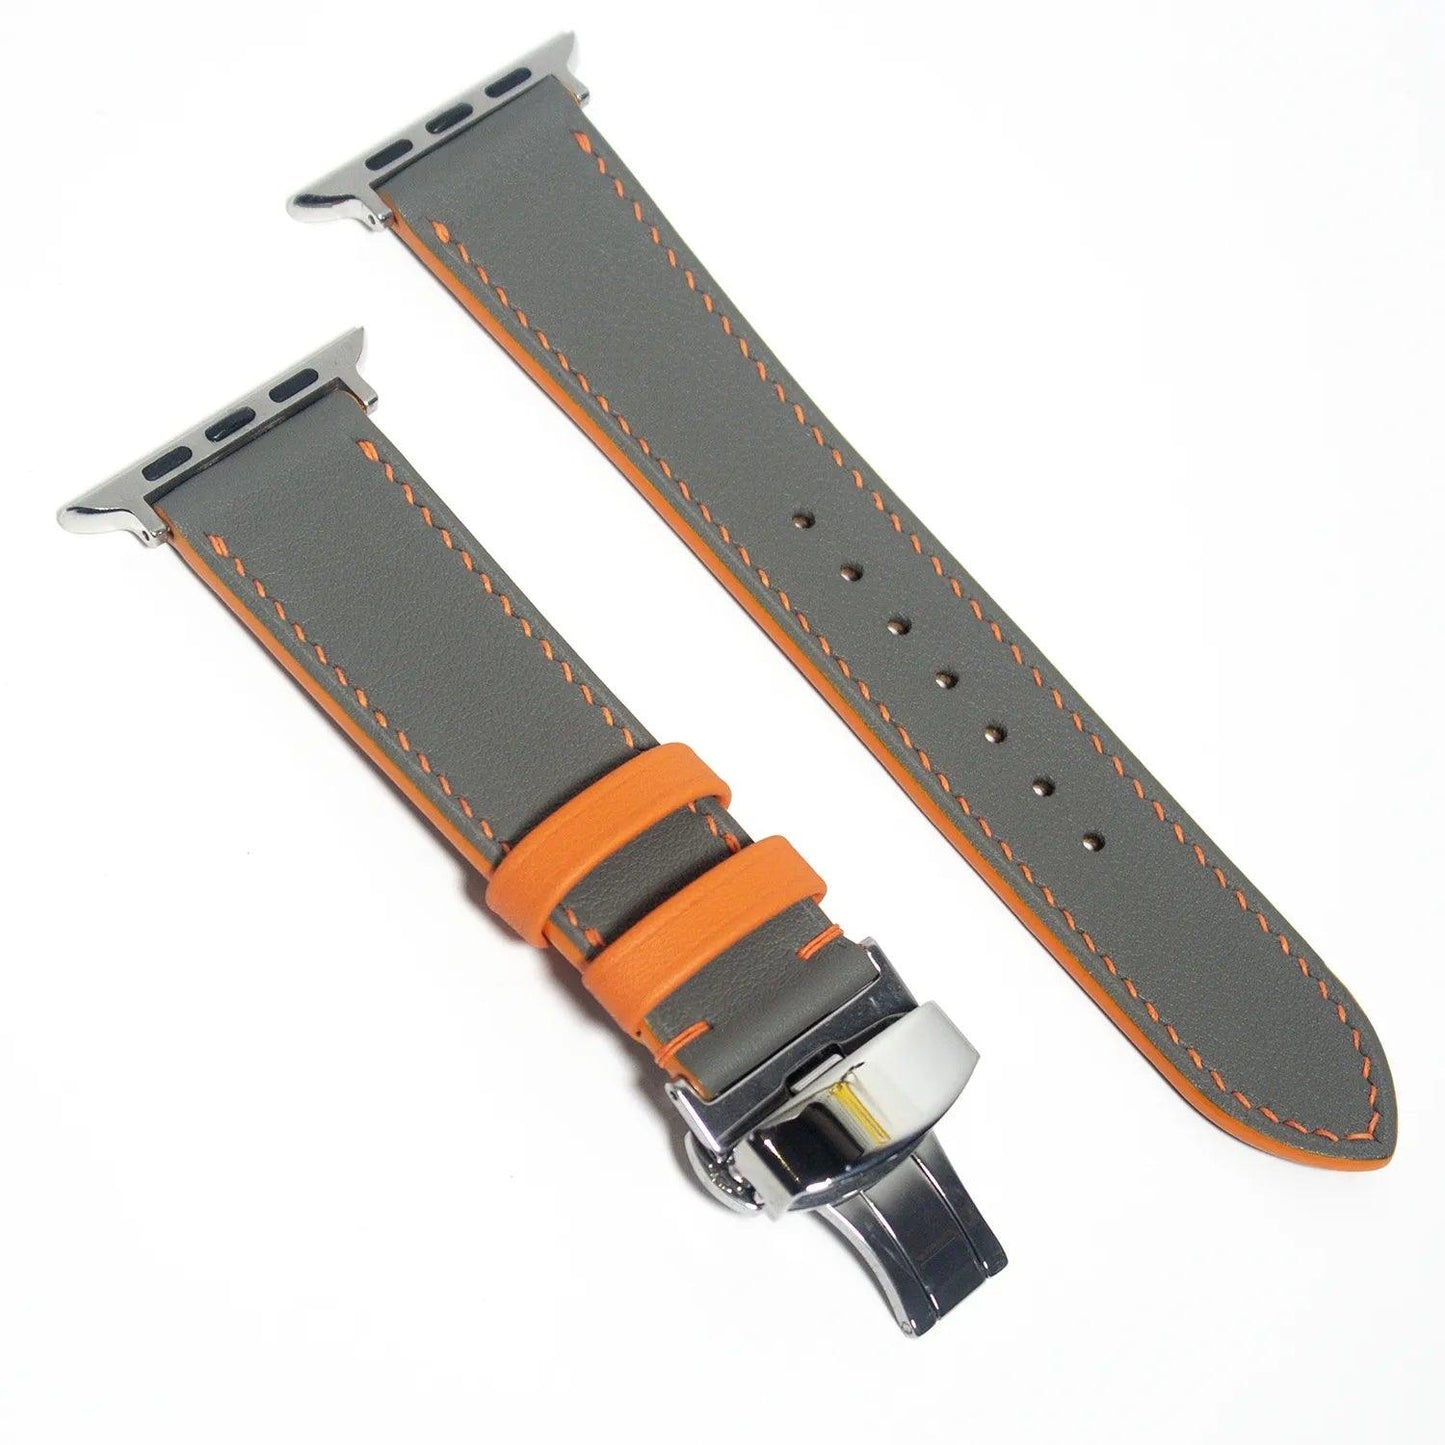 Chic leather Apple Watch band featuring gray Swift leather with distinctive orange stitching for a modern look.